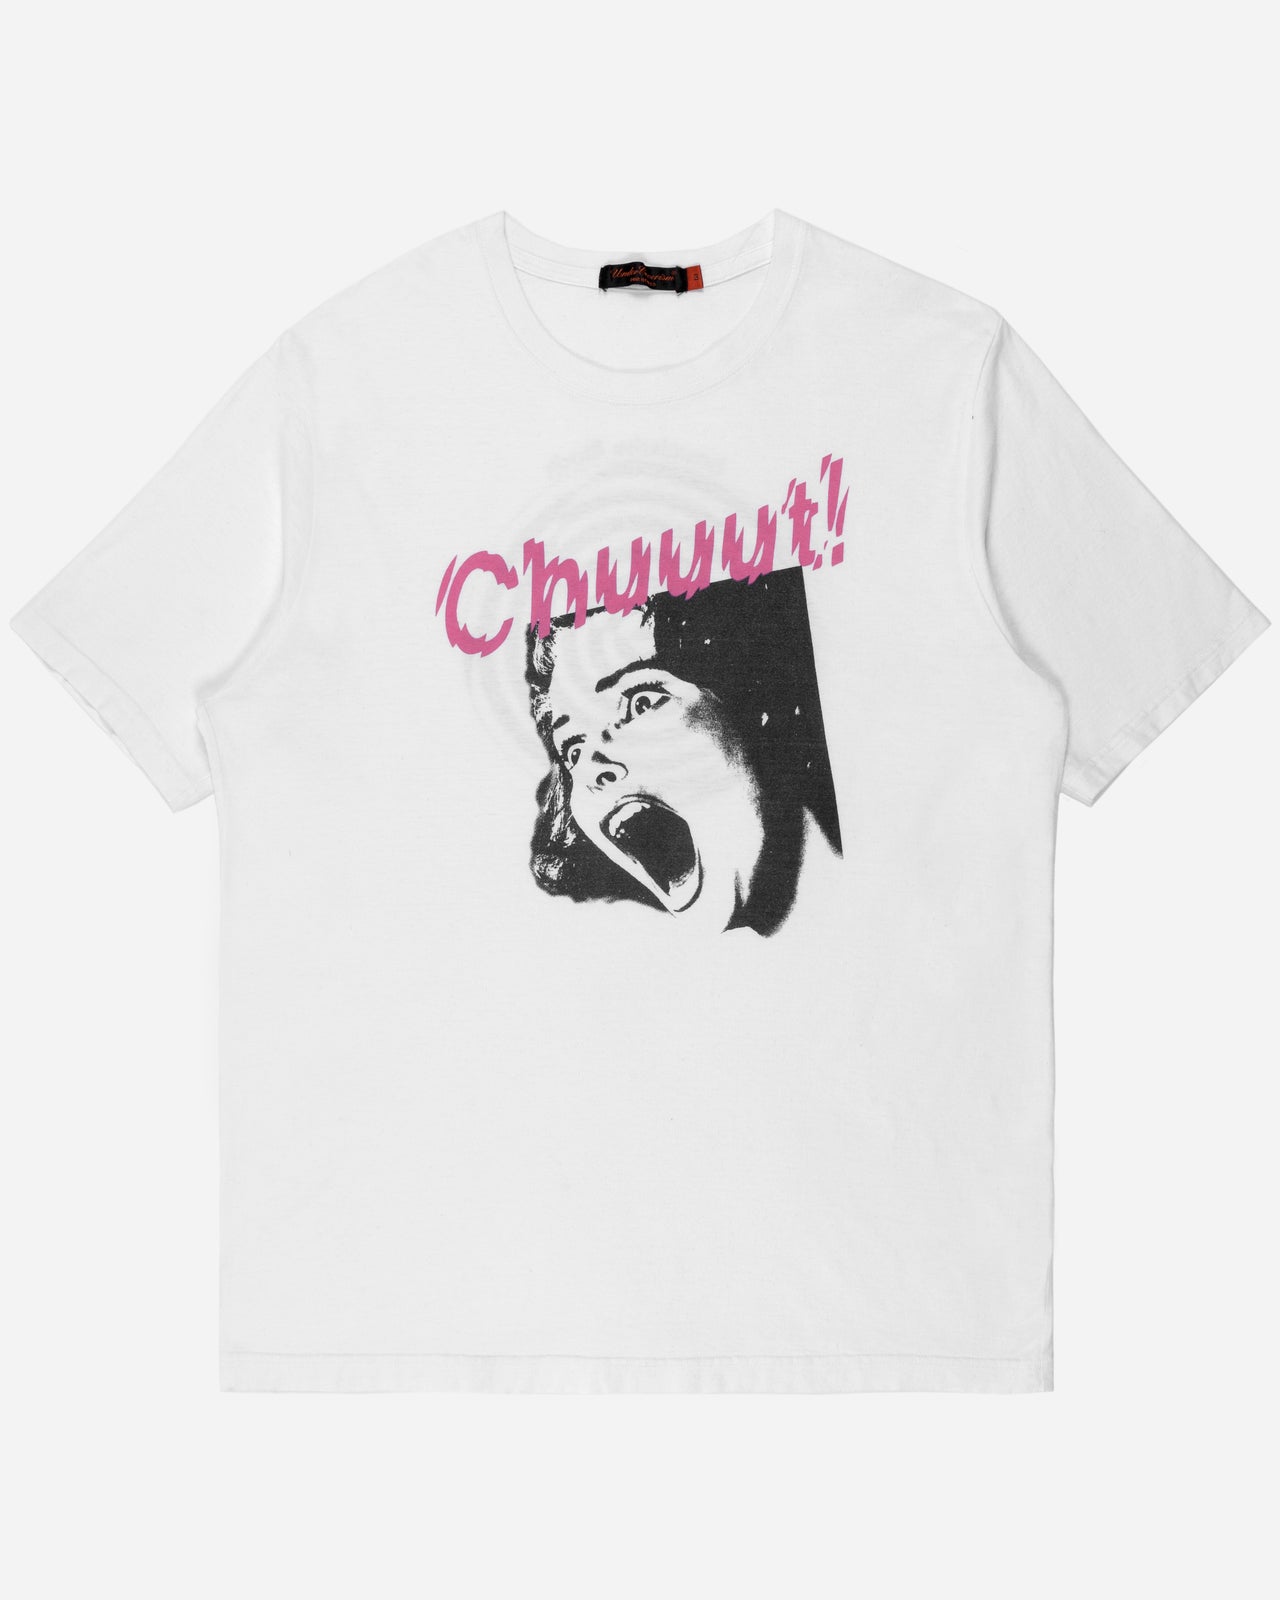 Undercover White “Chuuut” Tee - SS06 “T”